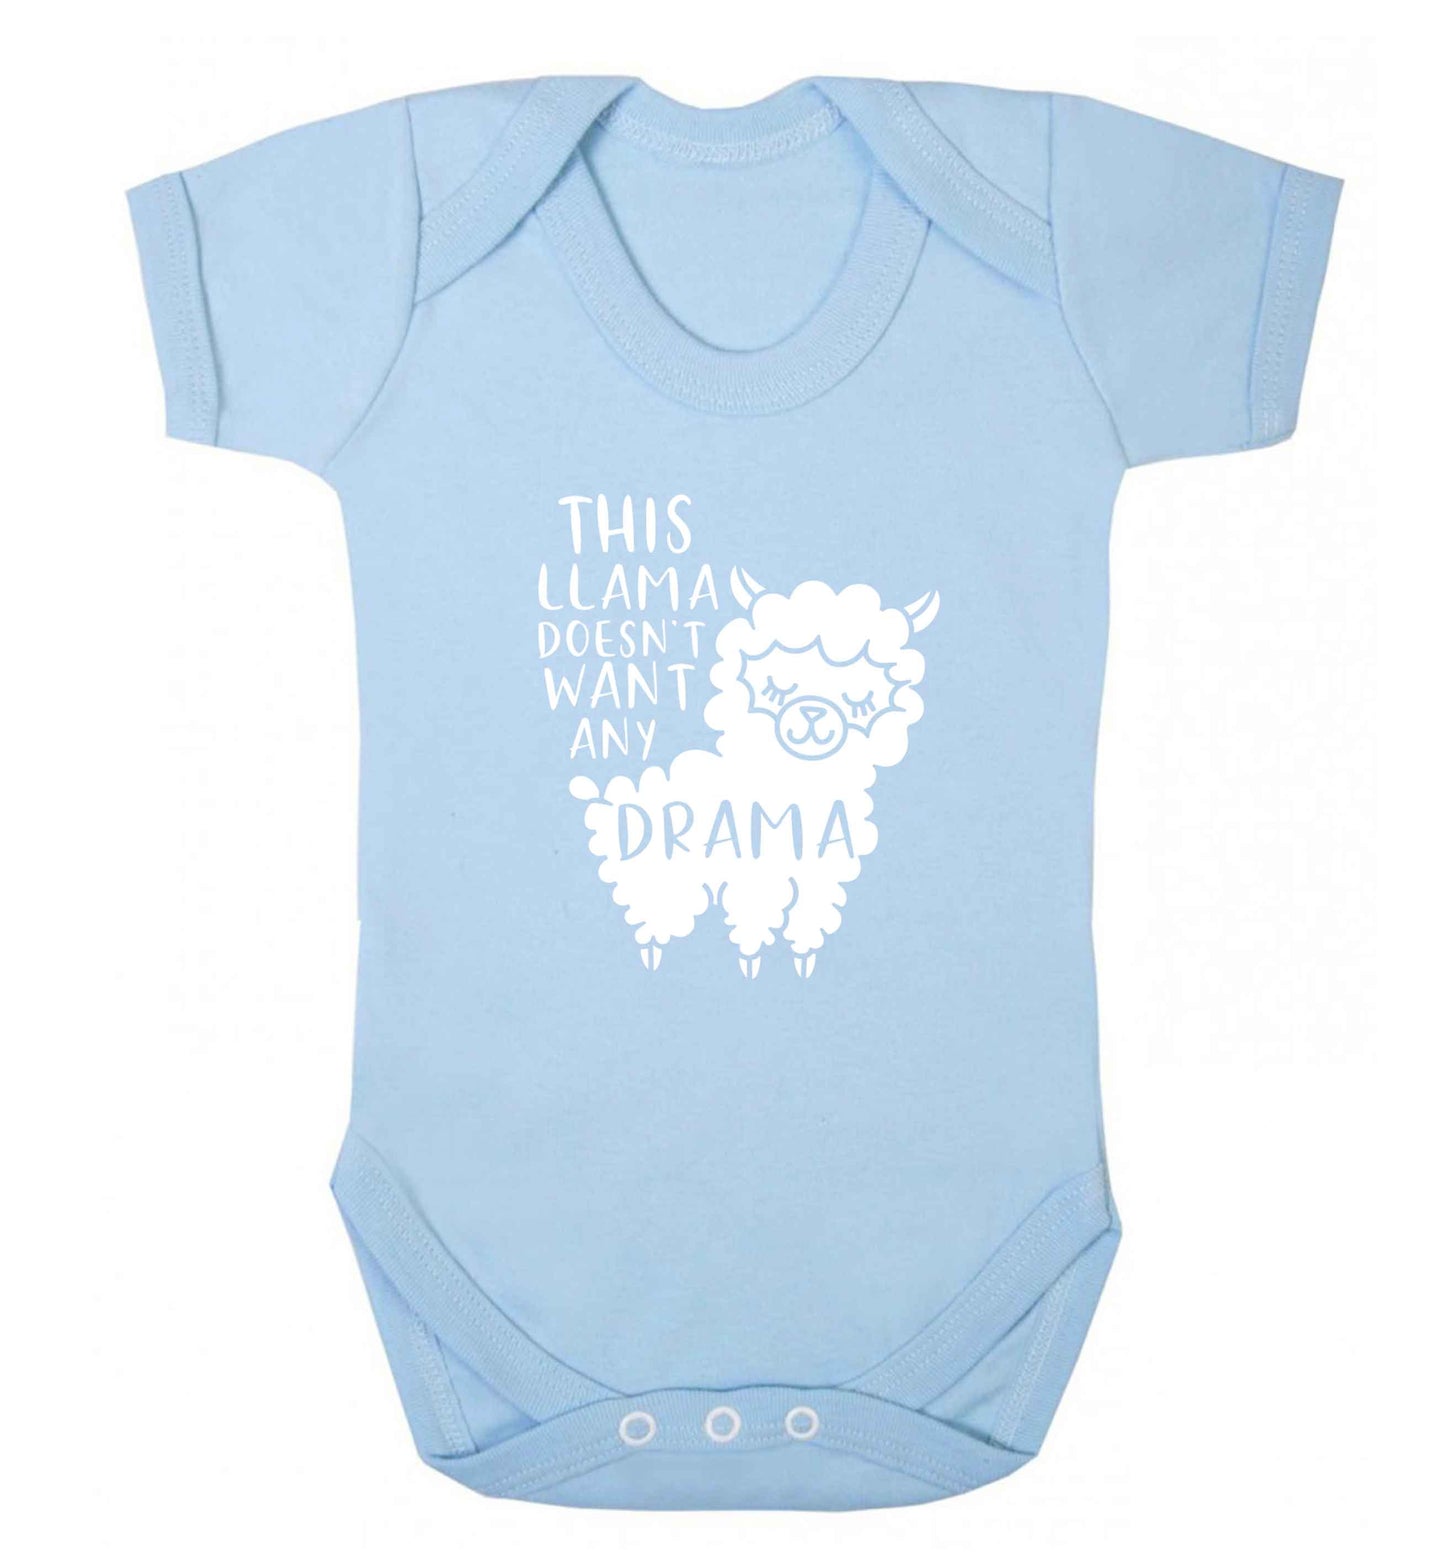 This Llama doesn't want any drama baby vest pale blue 18-24 months